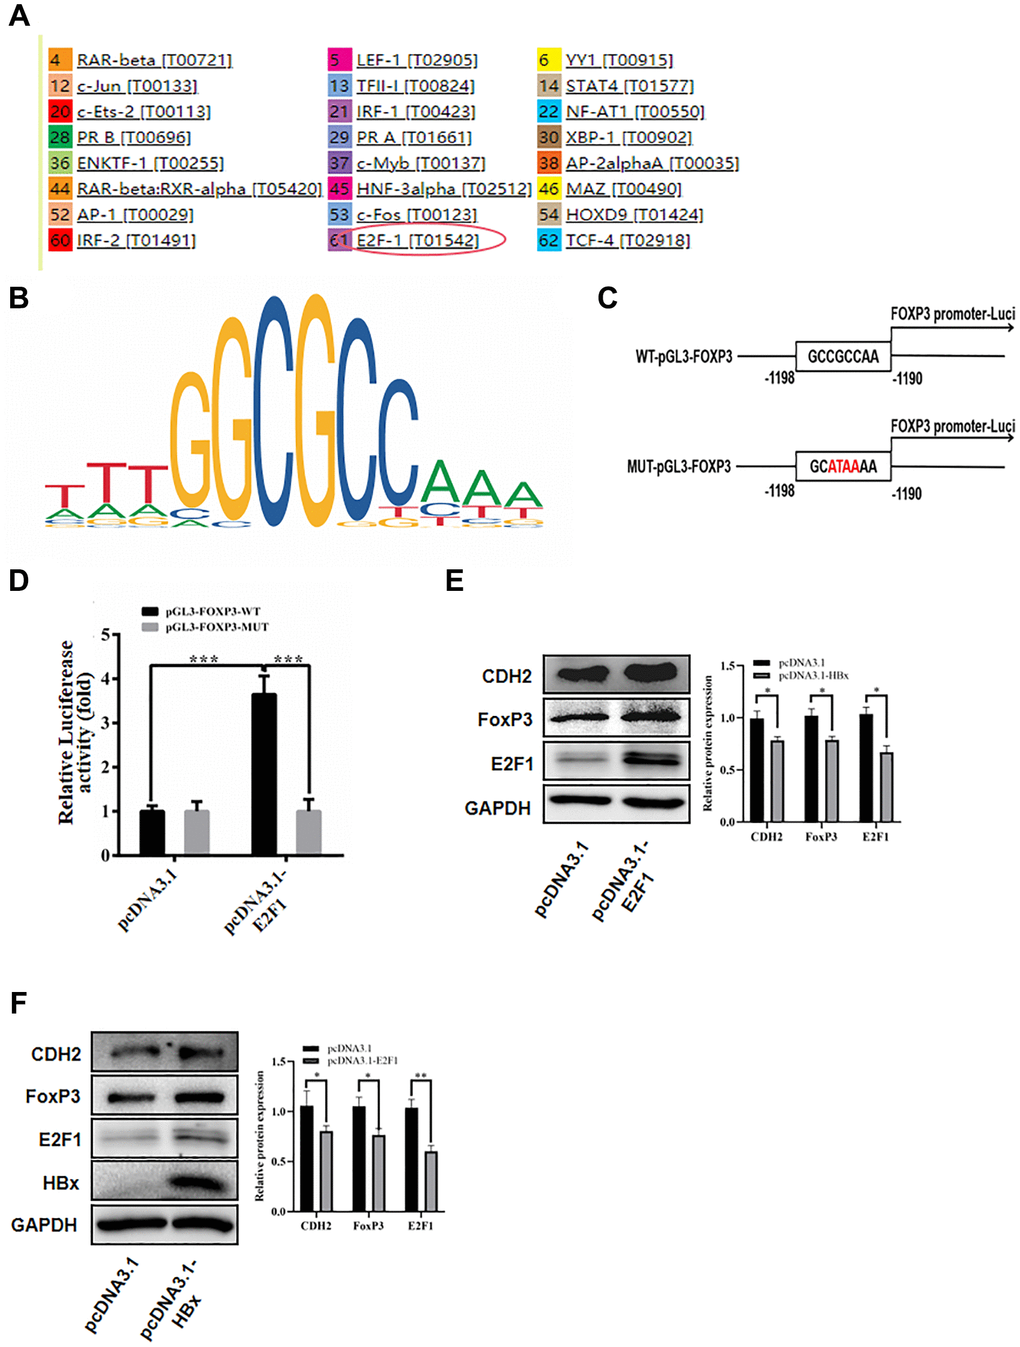 HBx promoted FoxP3 expression by E2F1. (A) Used PROMO website to predict the promoter of FoxP3. (B) E2F1 binding site in the FoxP3 promoter region. (C, D) Luciferase reporter assay in HEK-293T cells showed E2F1 significantly inhibited the luciferase activity of the vector carrying promoter of FoxP3, compared with control vector. (E) E2F1 significantly elevated the protein expression of FoxP3 by western blotting and reduced the expression of miR-187-5p by qRT-PCR. (F) HBx promoted the expression of E2F1 by western blotting. The experiments were repeated at least 3 independent times.